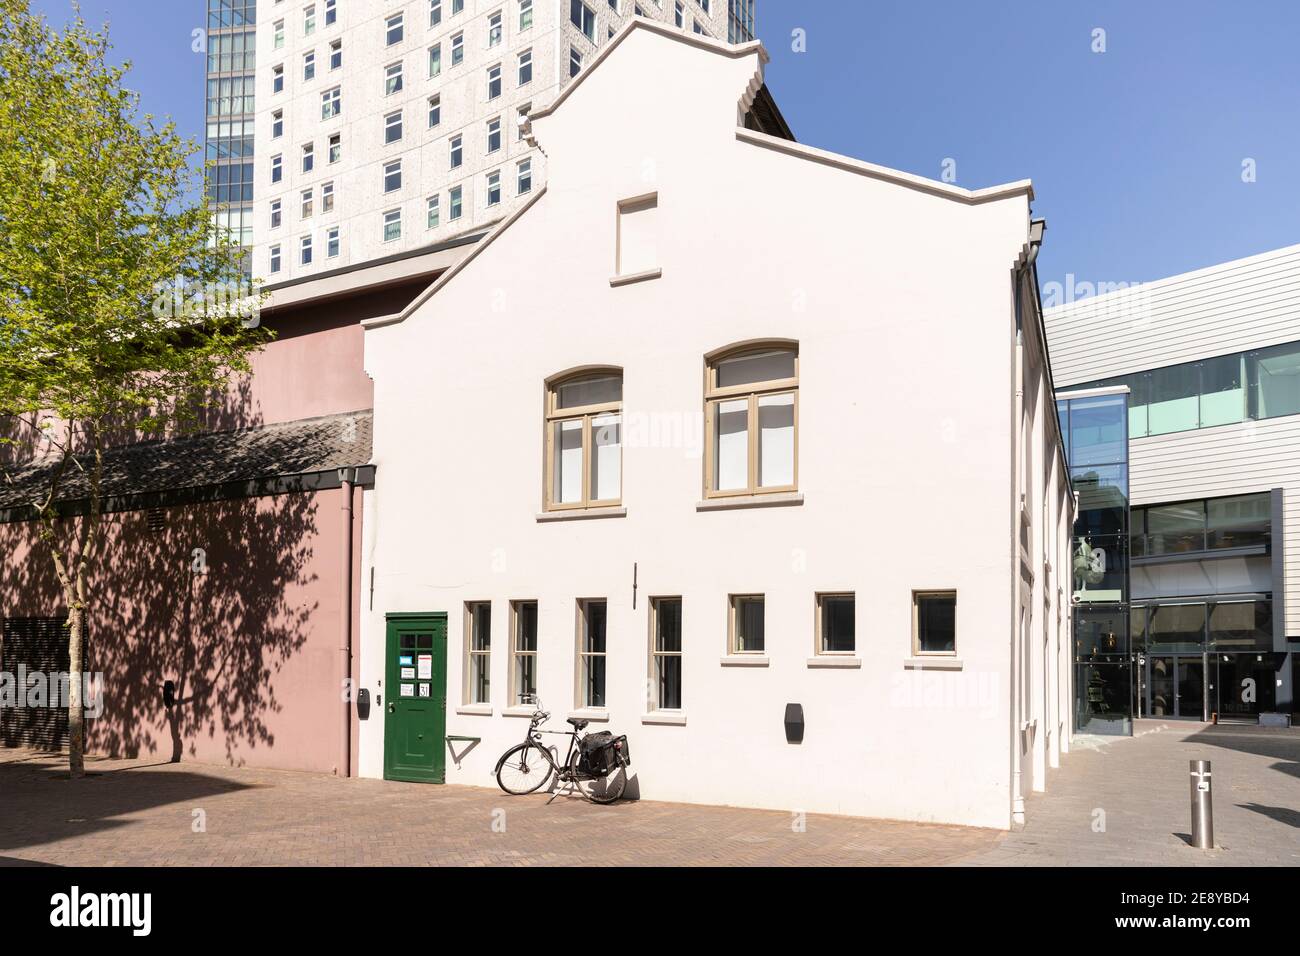 Eindhoven, The Netherlands, 21st May 2020. Eindhoven City with a white building in the city center on a sunny day an a blue sky. The Admirant and gree Stock Photo